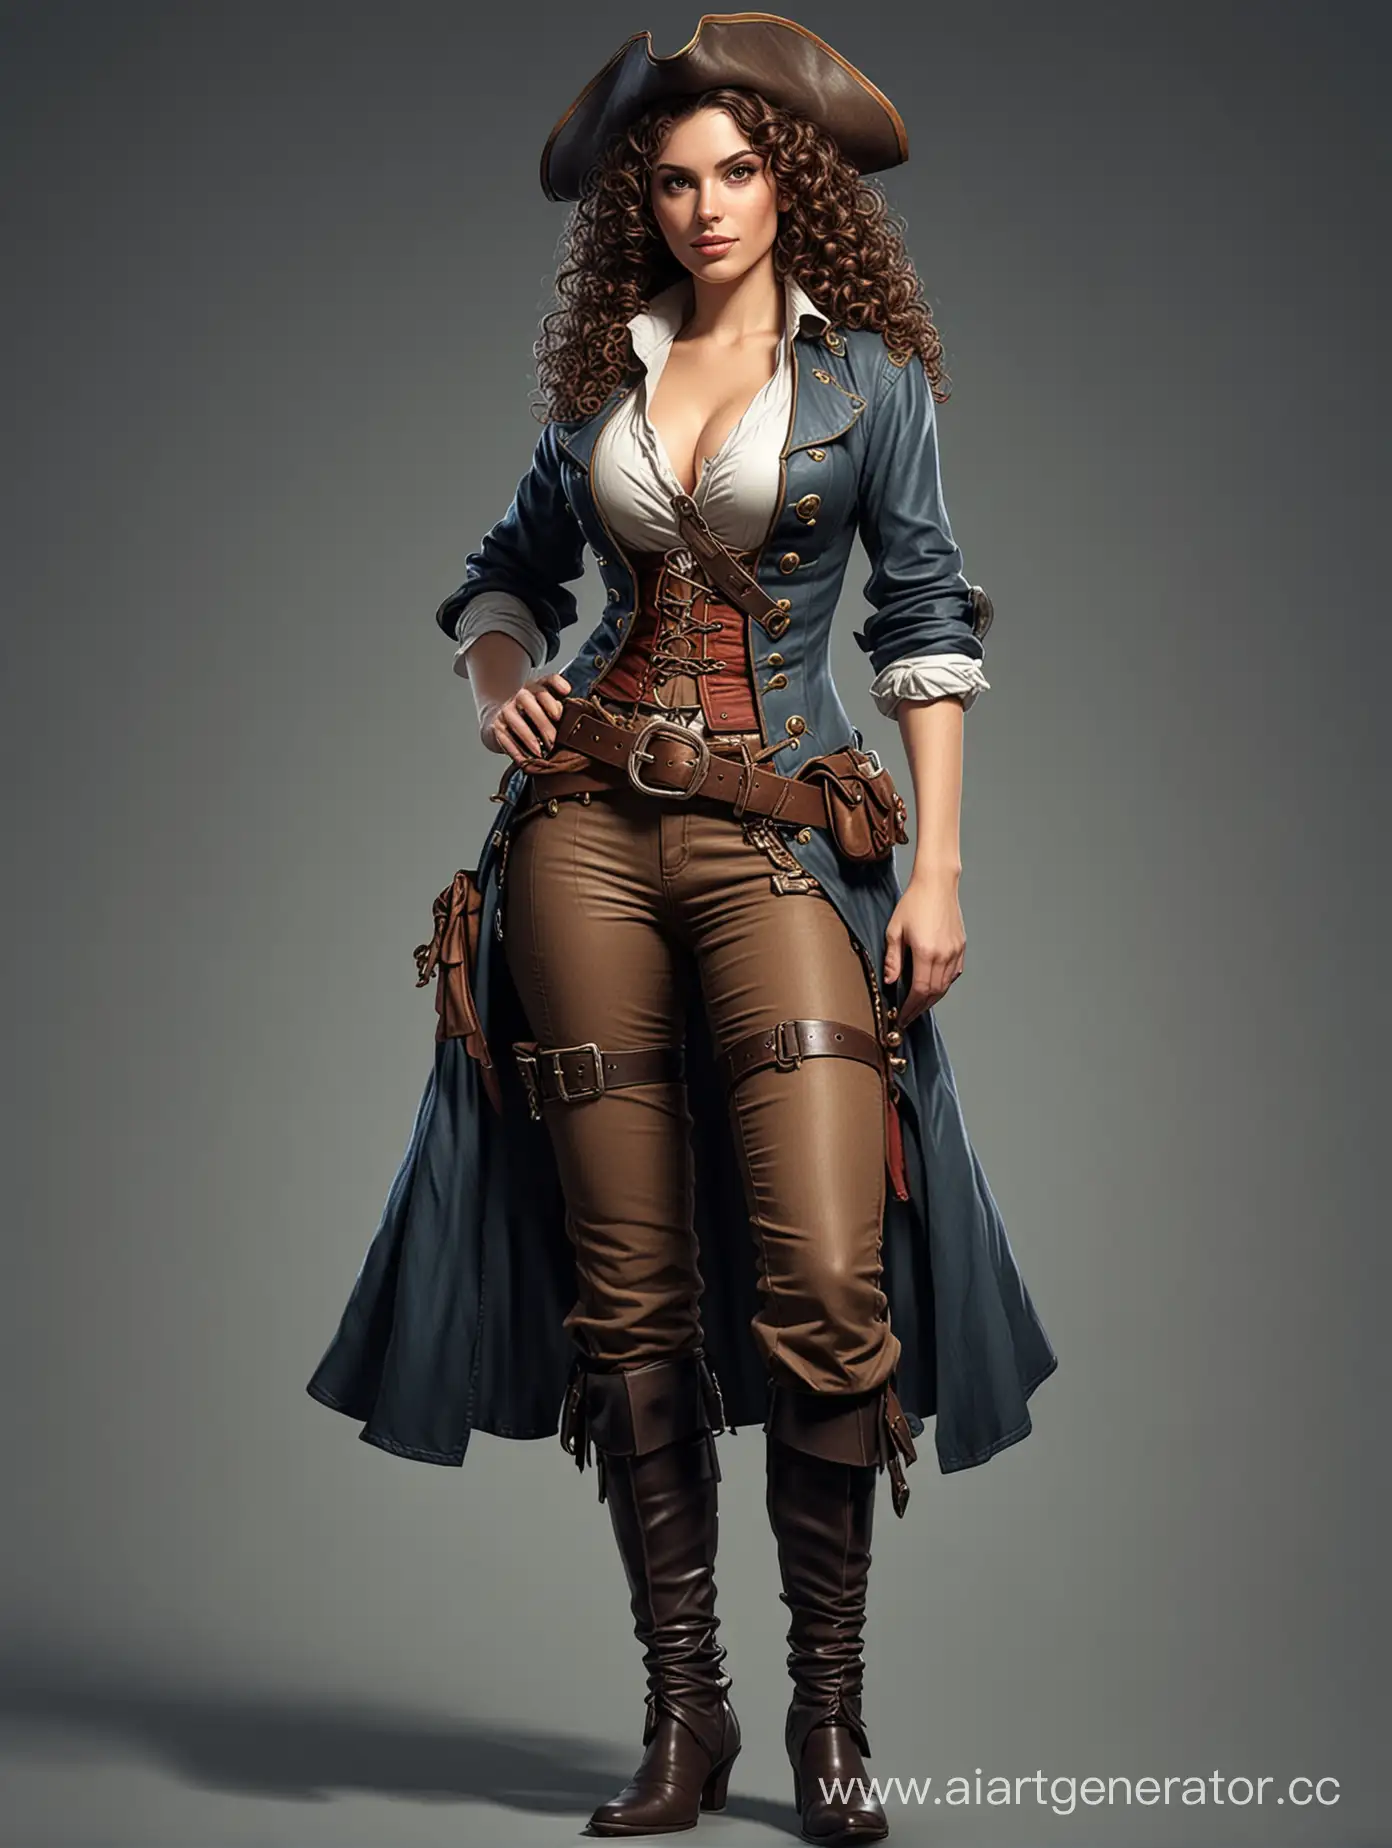 Adventurous-CurlyHaired-Brunette-Pirate-in-Realistic-Comics-Style